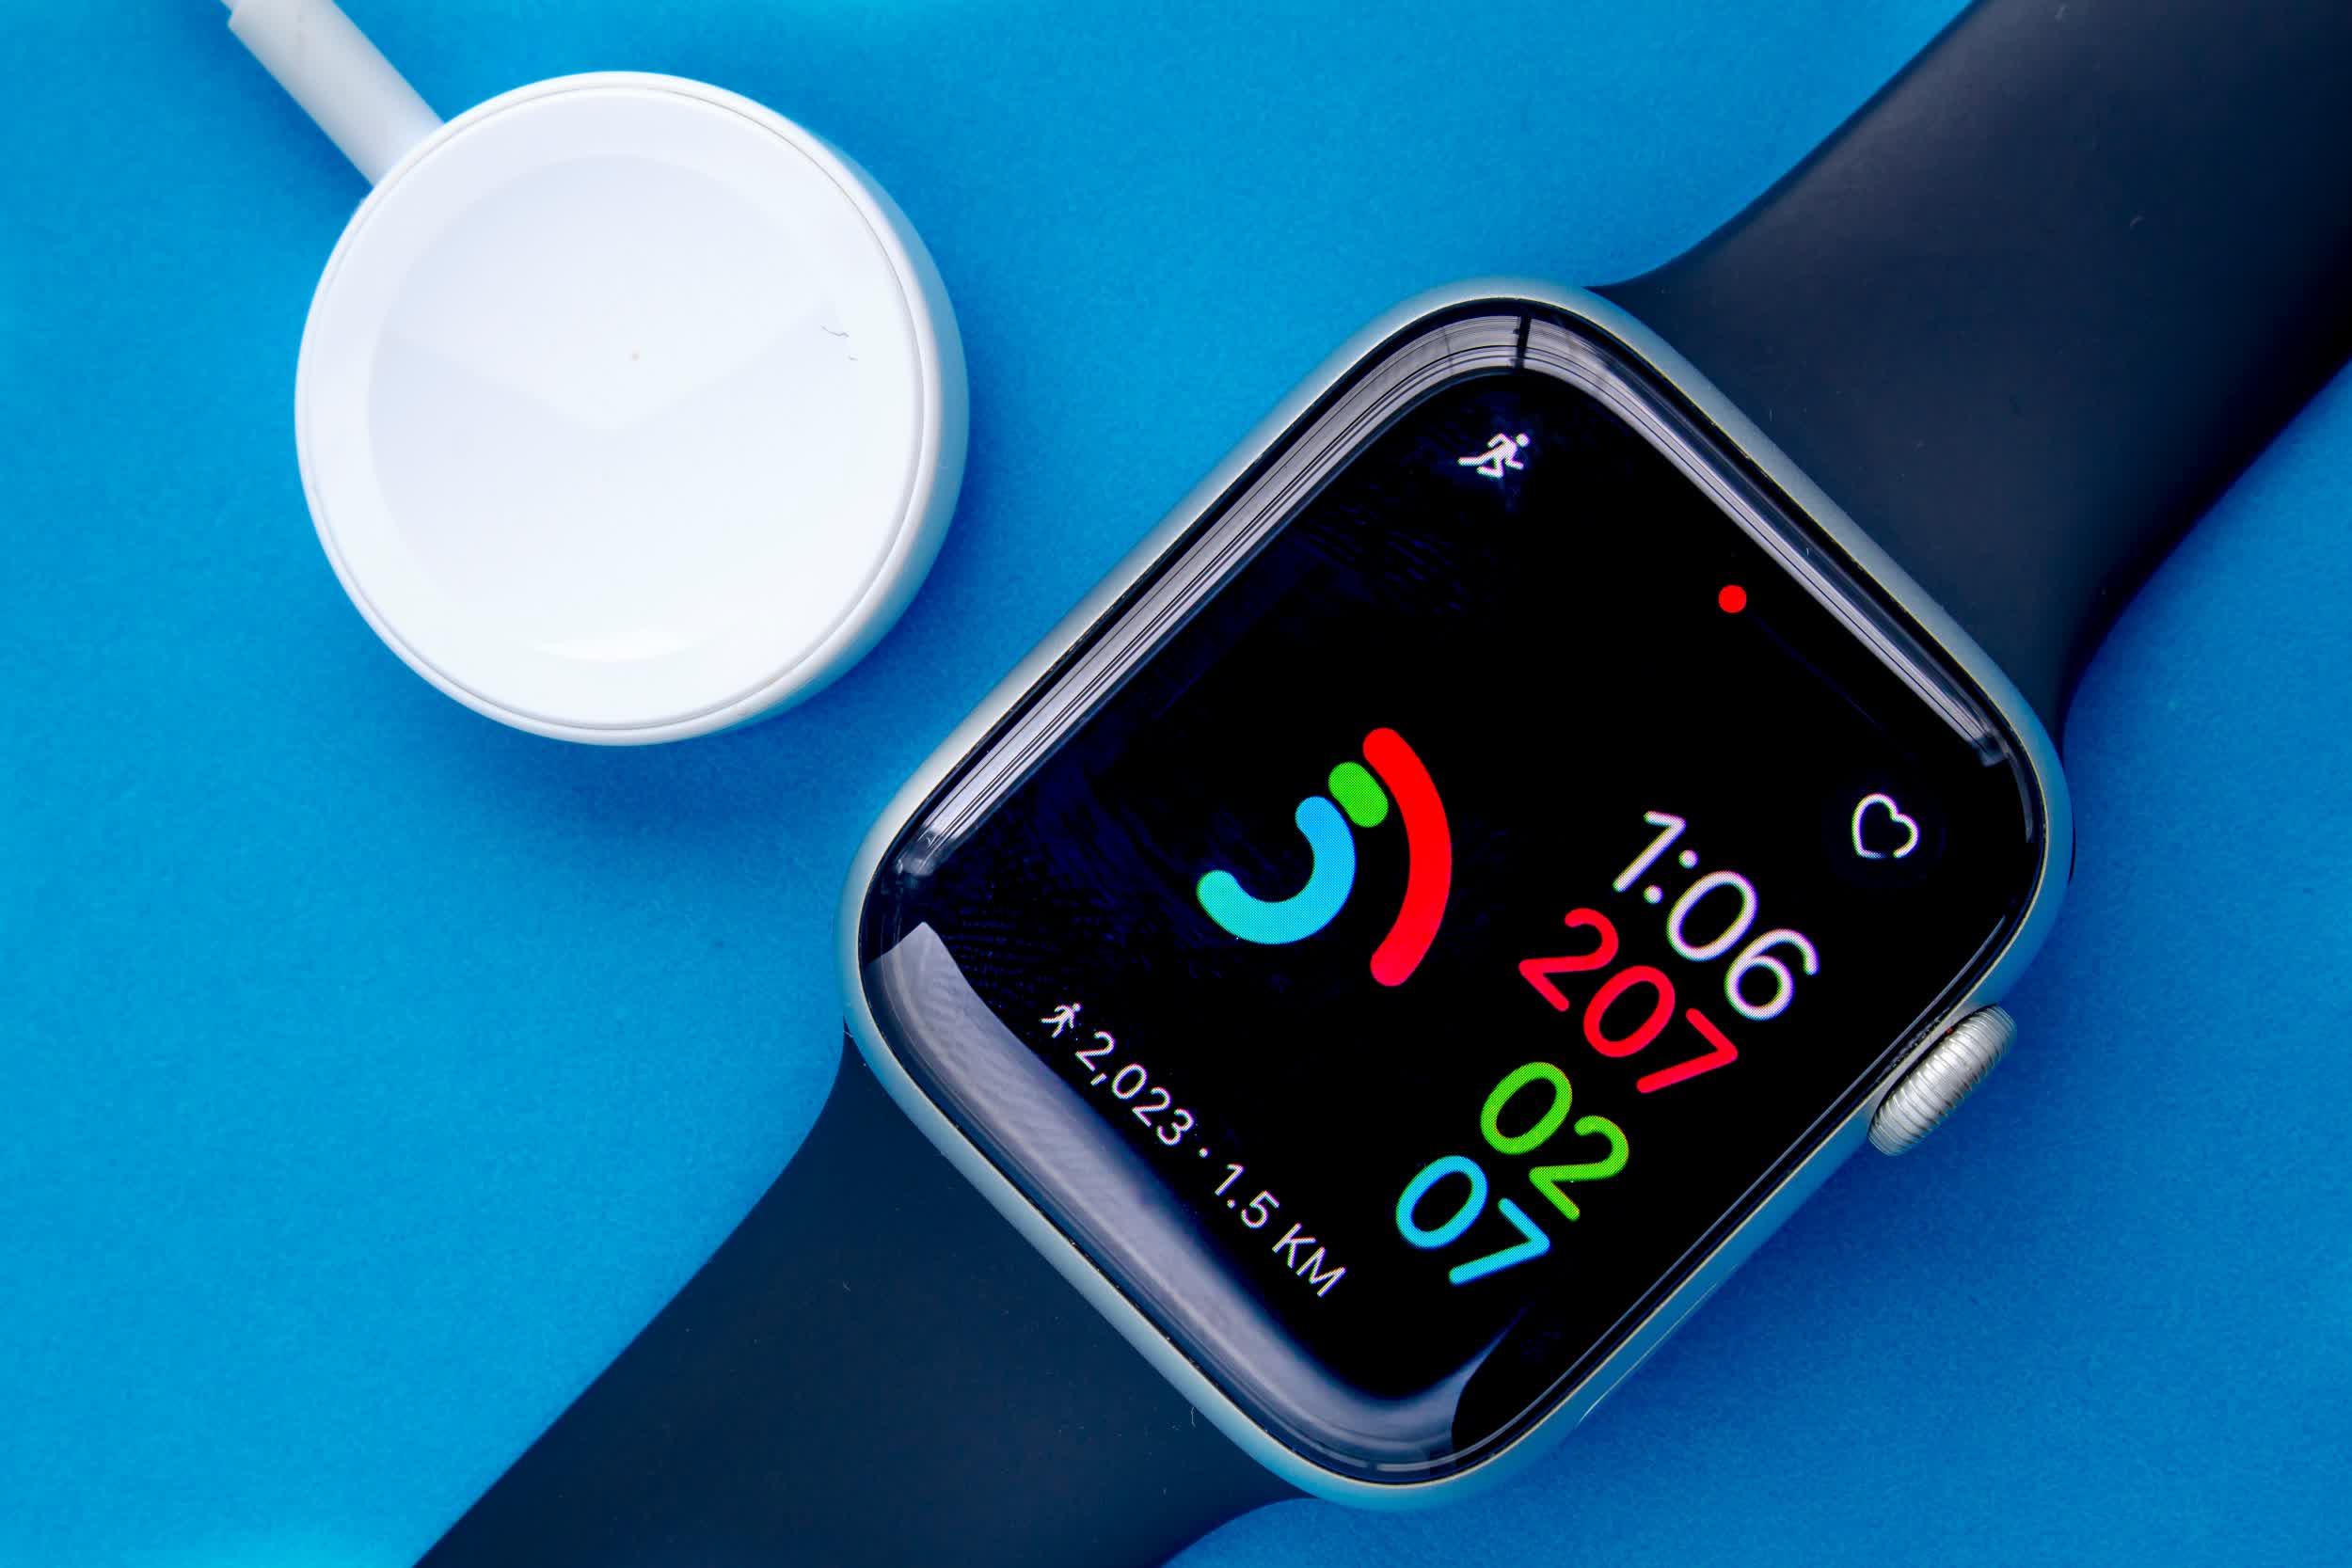 Future Apple Watch could measure blood glucose, pressure, and alcohol levels